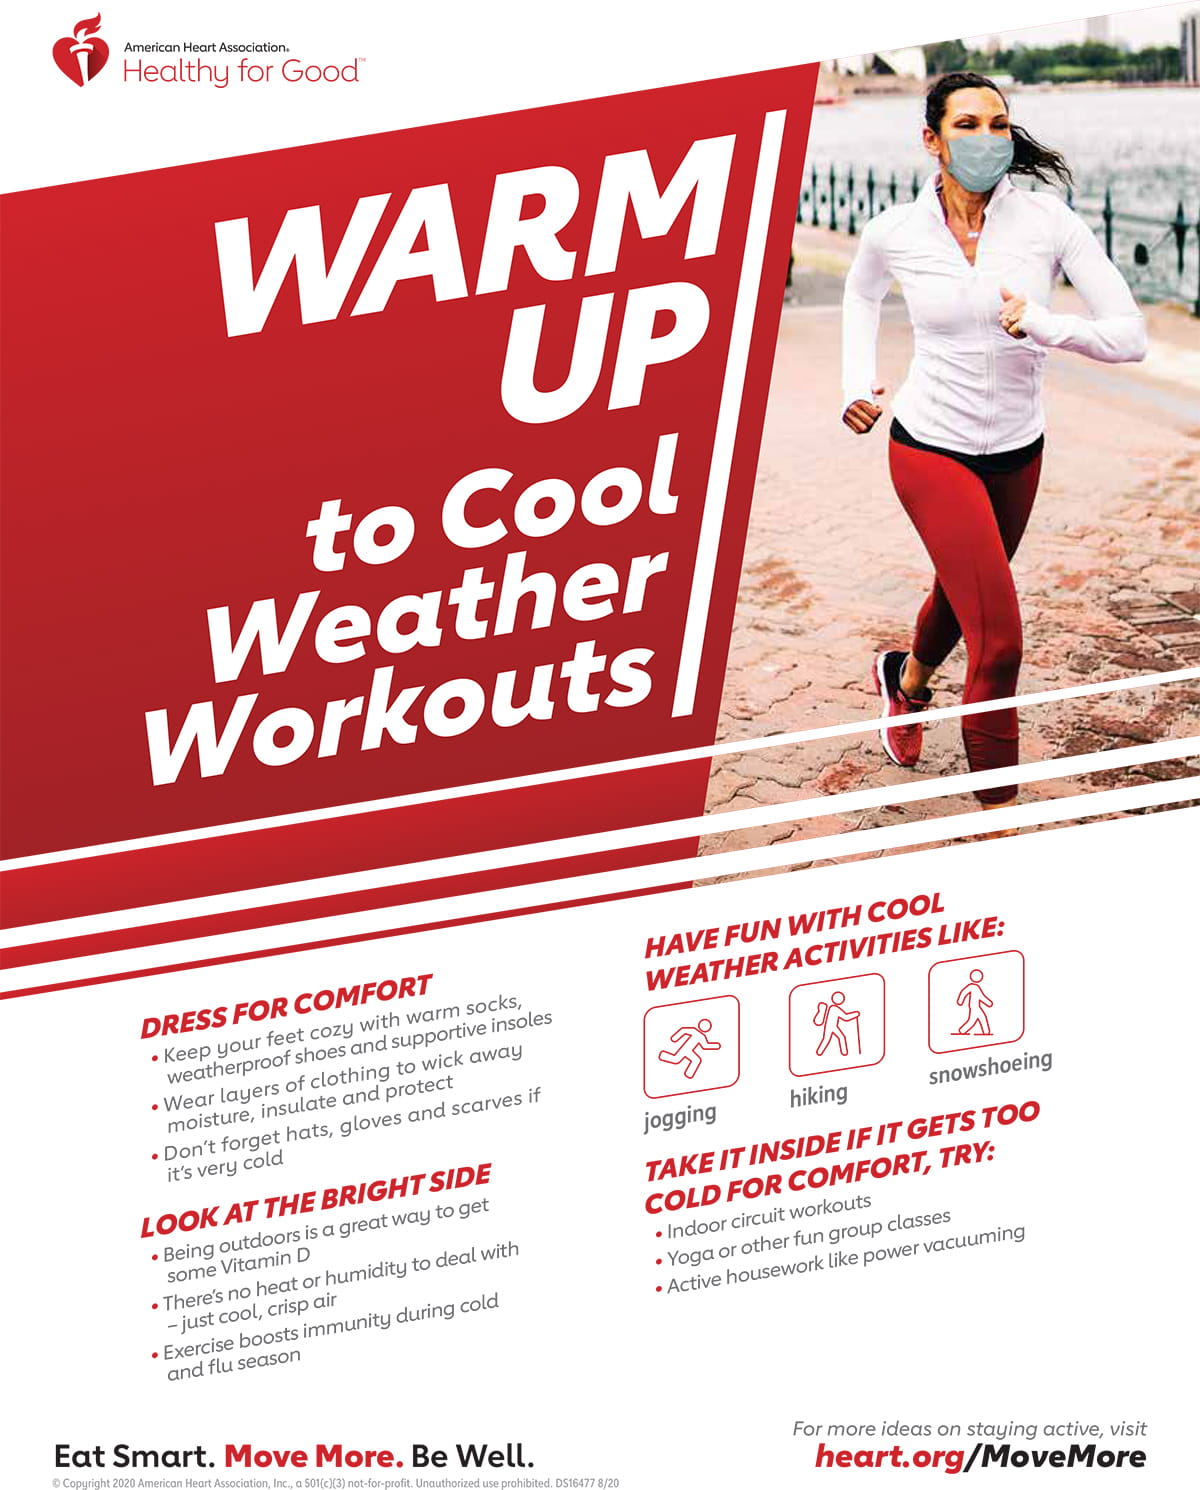 Warm Up with Cool-Weather Workouts | American Heart Association